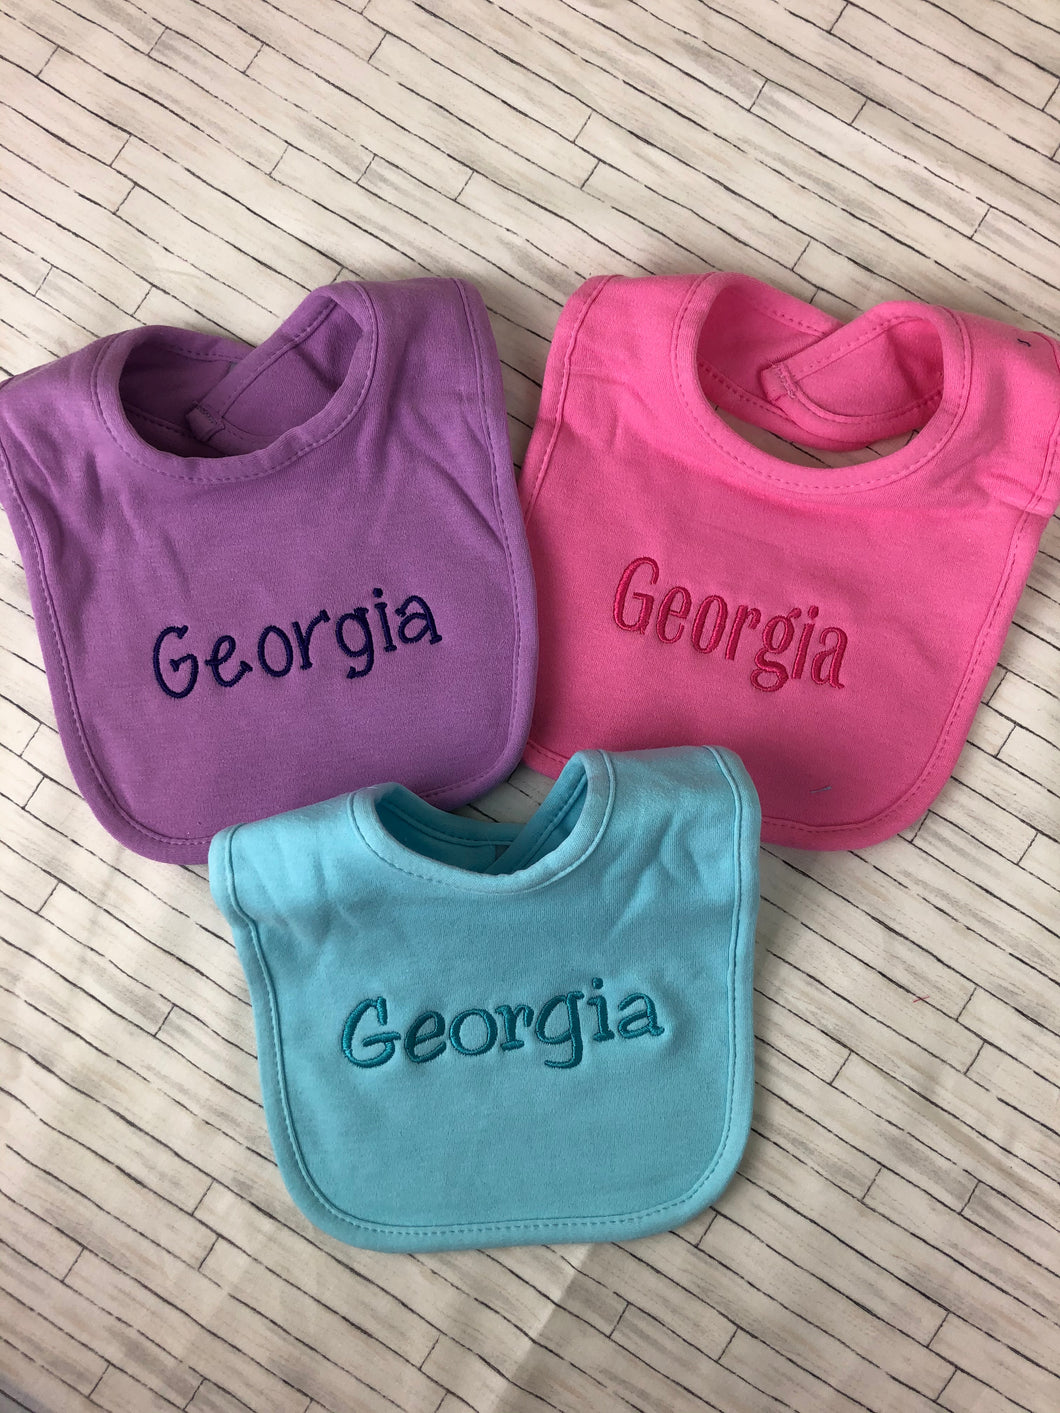 Boy Bib Set - Makes a Great Gift also a Day Care Necessity - Girl Sets Available too